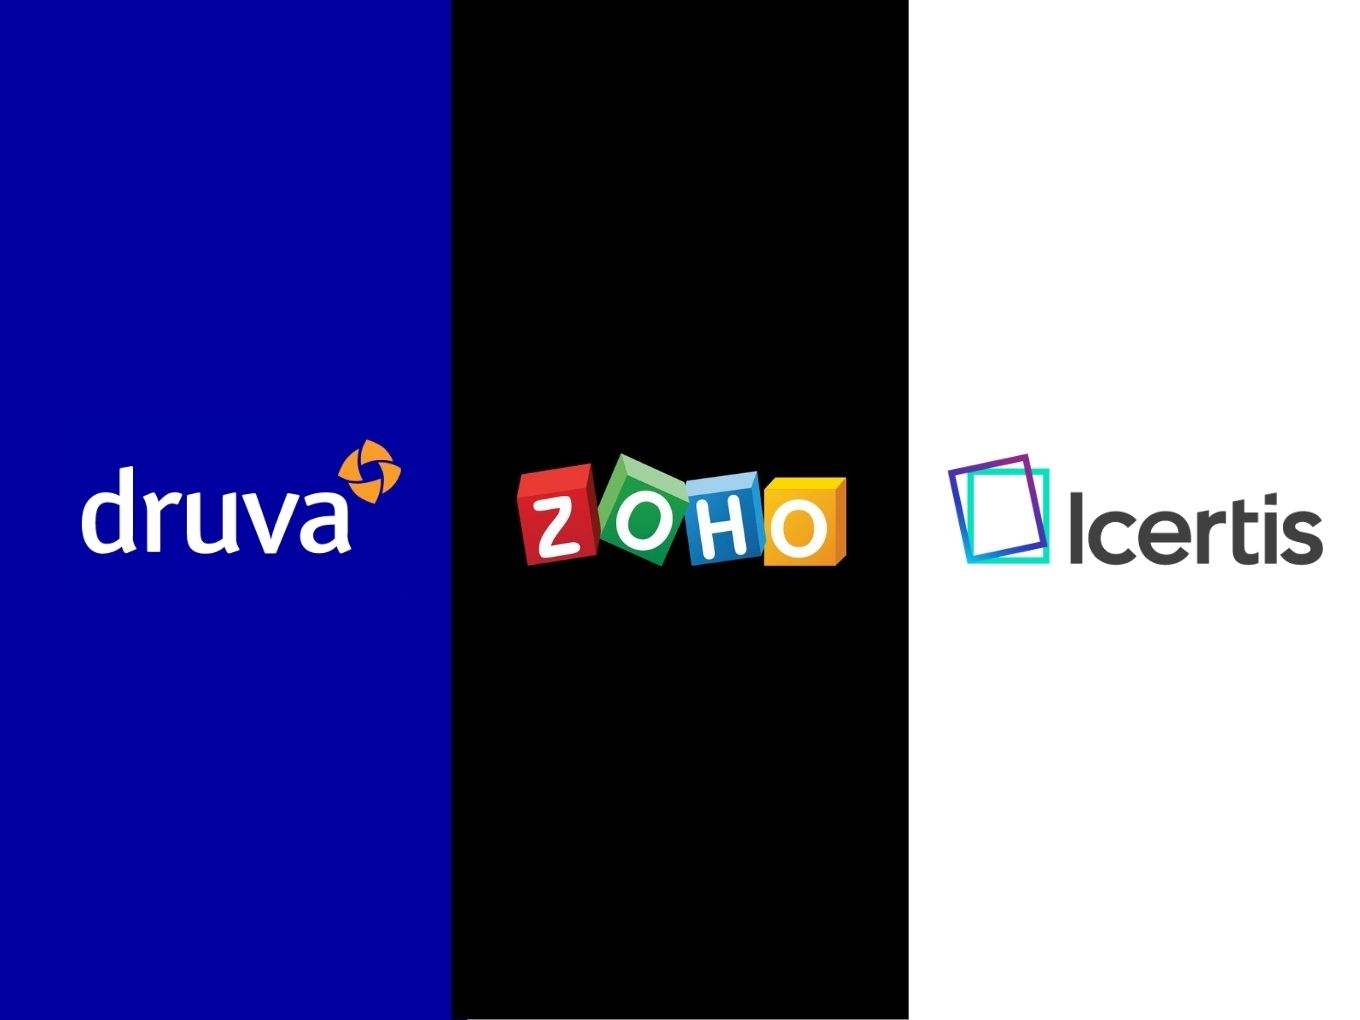 [What The Financials] Indian SaaS Giants Zoho, Druva & Icertis Report Upto 2X Rise in Profits, Raising Hopes Increase Employee Spend